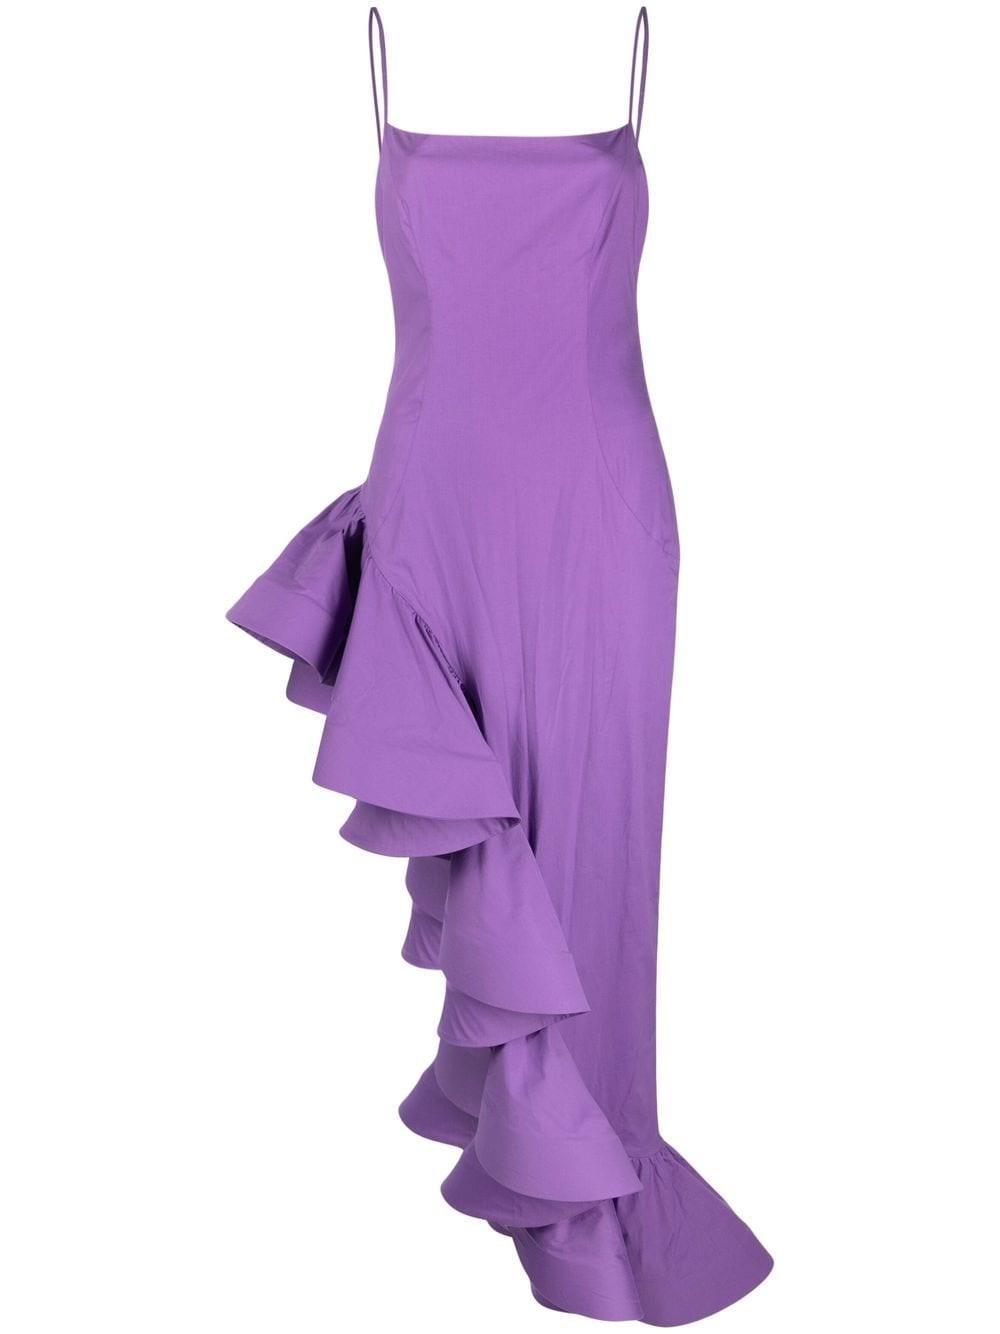 GIUSEPPE DI MORABITO Asymmetrical Dress With Rupches in Purple | Lyst